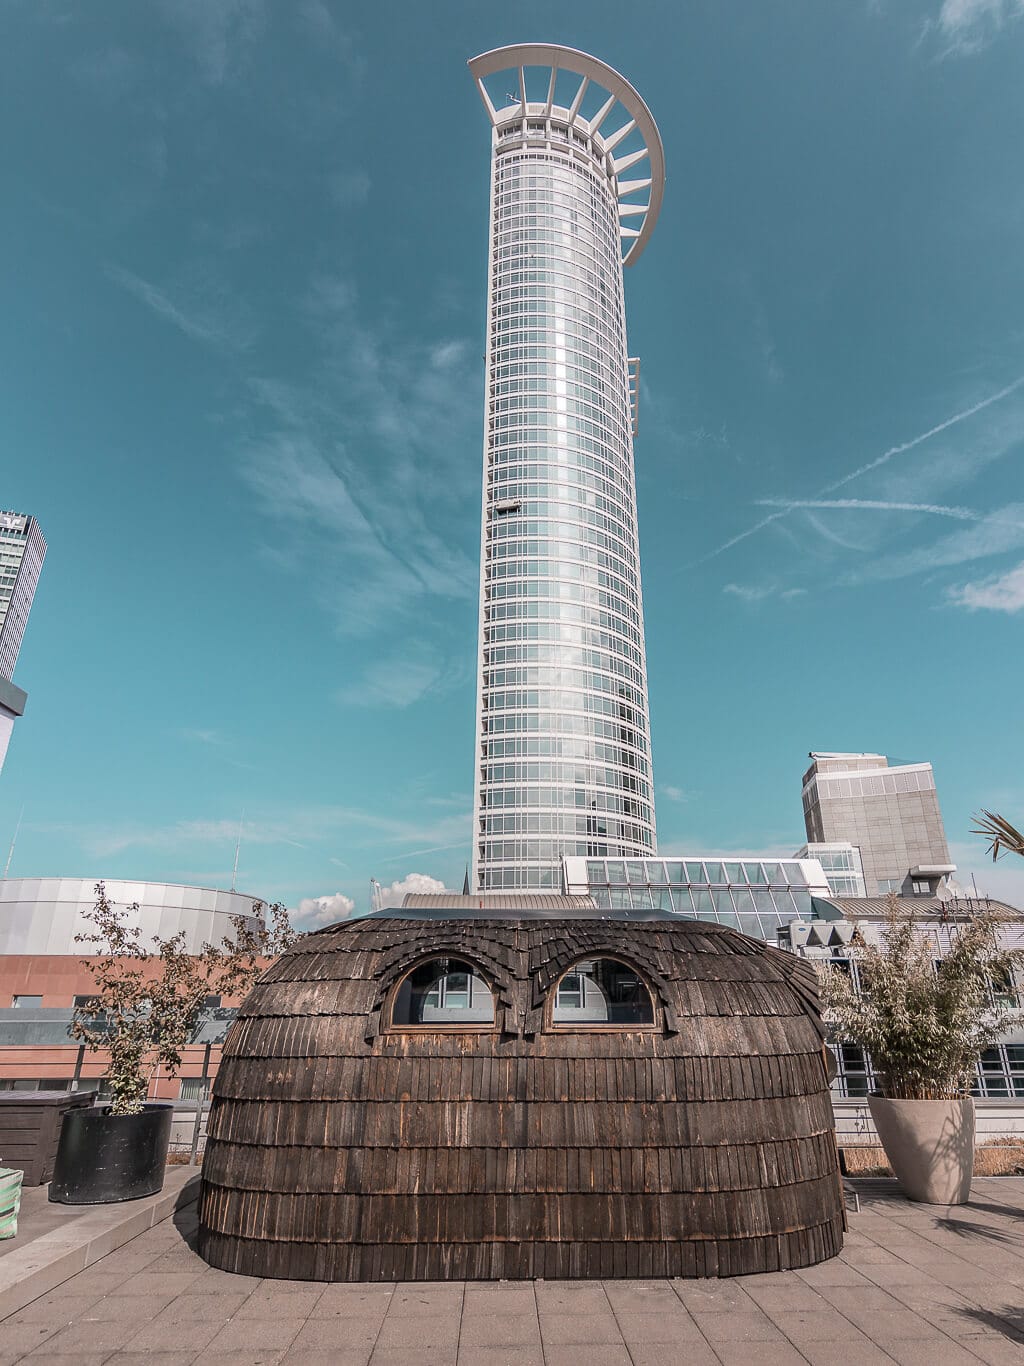 Frankfurt, Germany - What to do and see in Frankfurt, cool hotel, shopping and food spots not to be missed